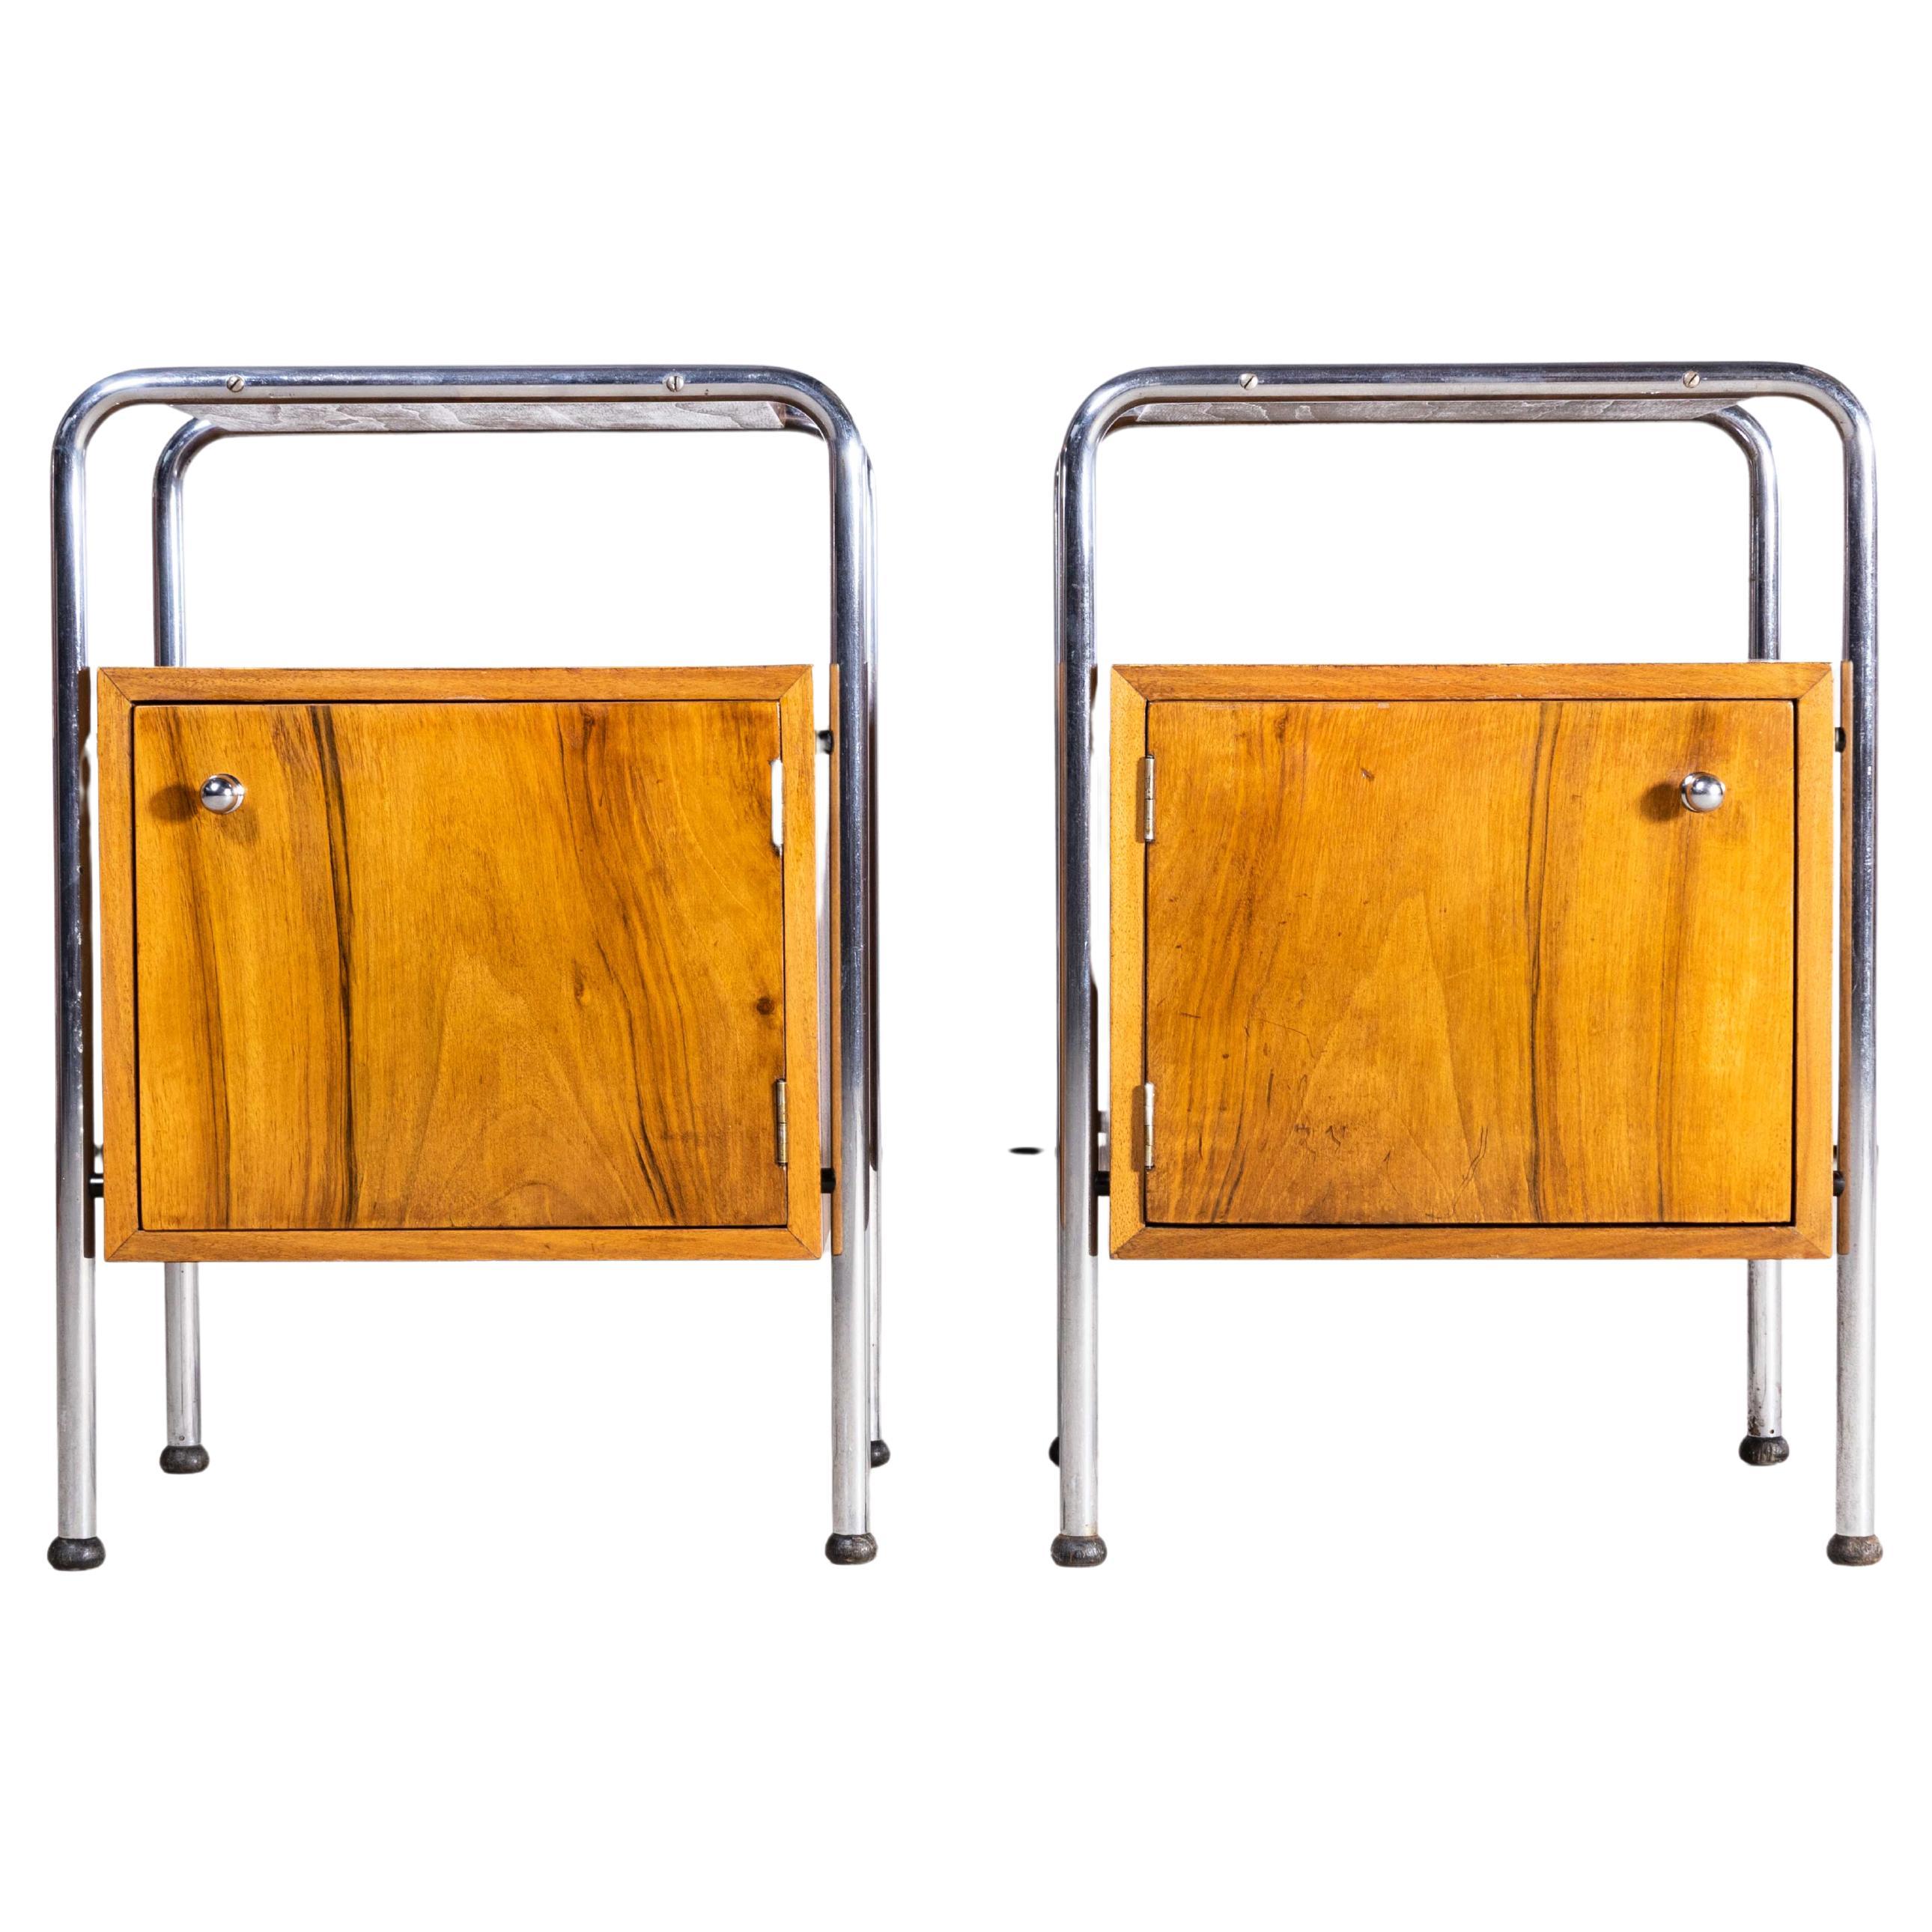 1960s Chrome and Birch Bedside Cabinets, Pair For Sale